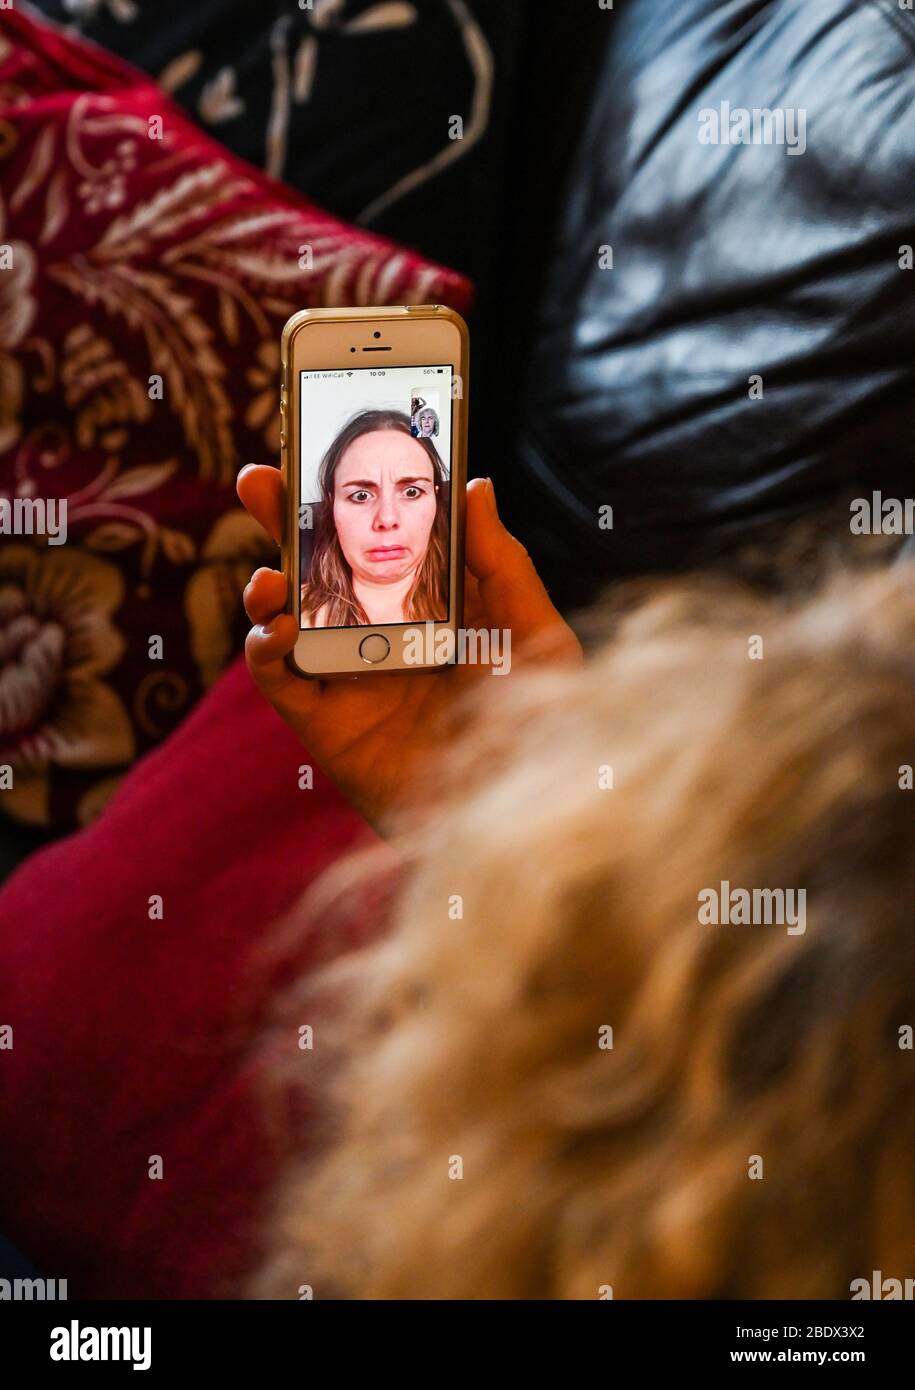 Young woman speaking to mother on Apple iPhone using FaceTime during the coronavirus lockdown UK  Photograph taken by Simon Dack Stock Photo